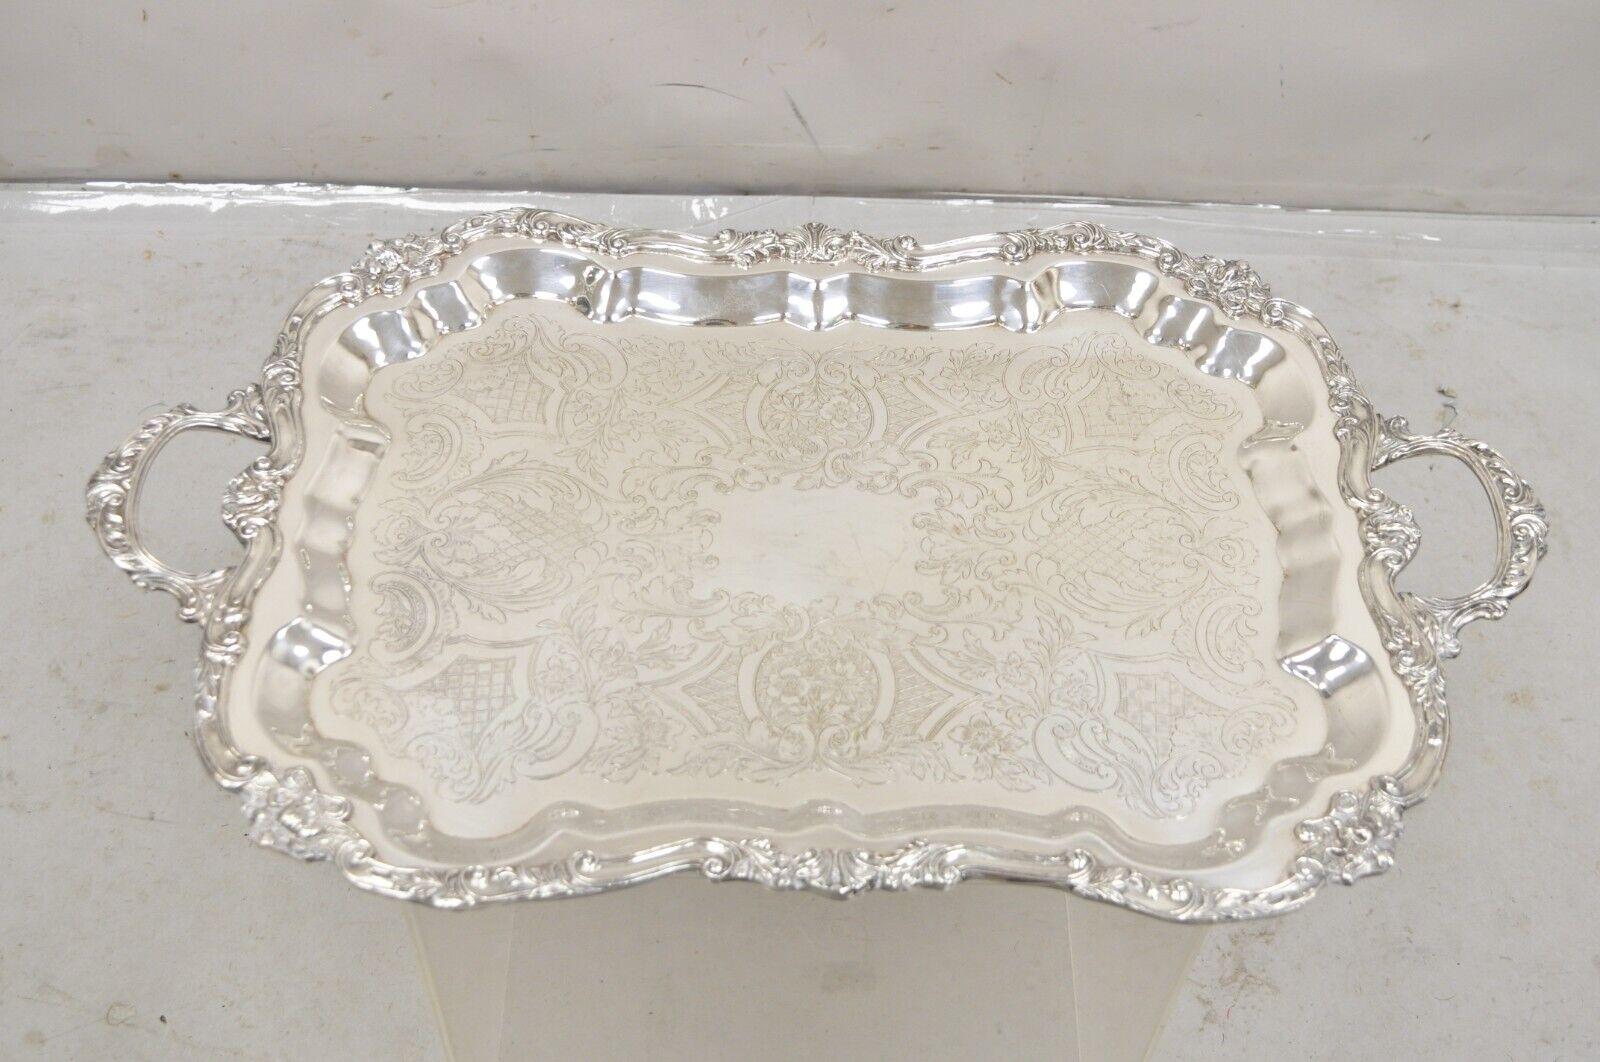 Vintage Sheridan Large Ornate Silver Plated Victorian Style Serving Platter Tray . Circa Mid 20th Century. Measurements:  2